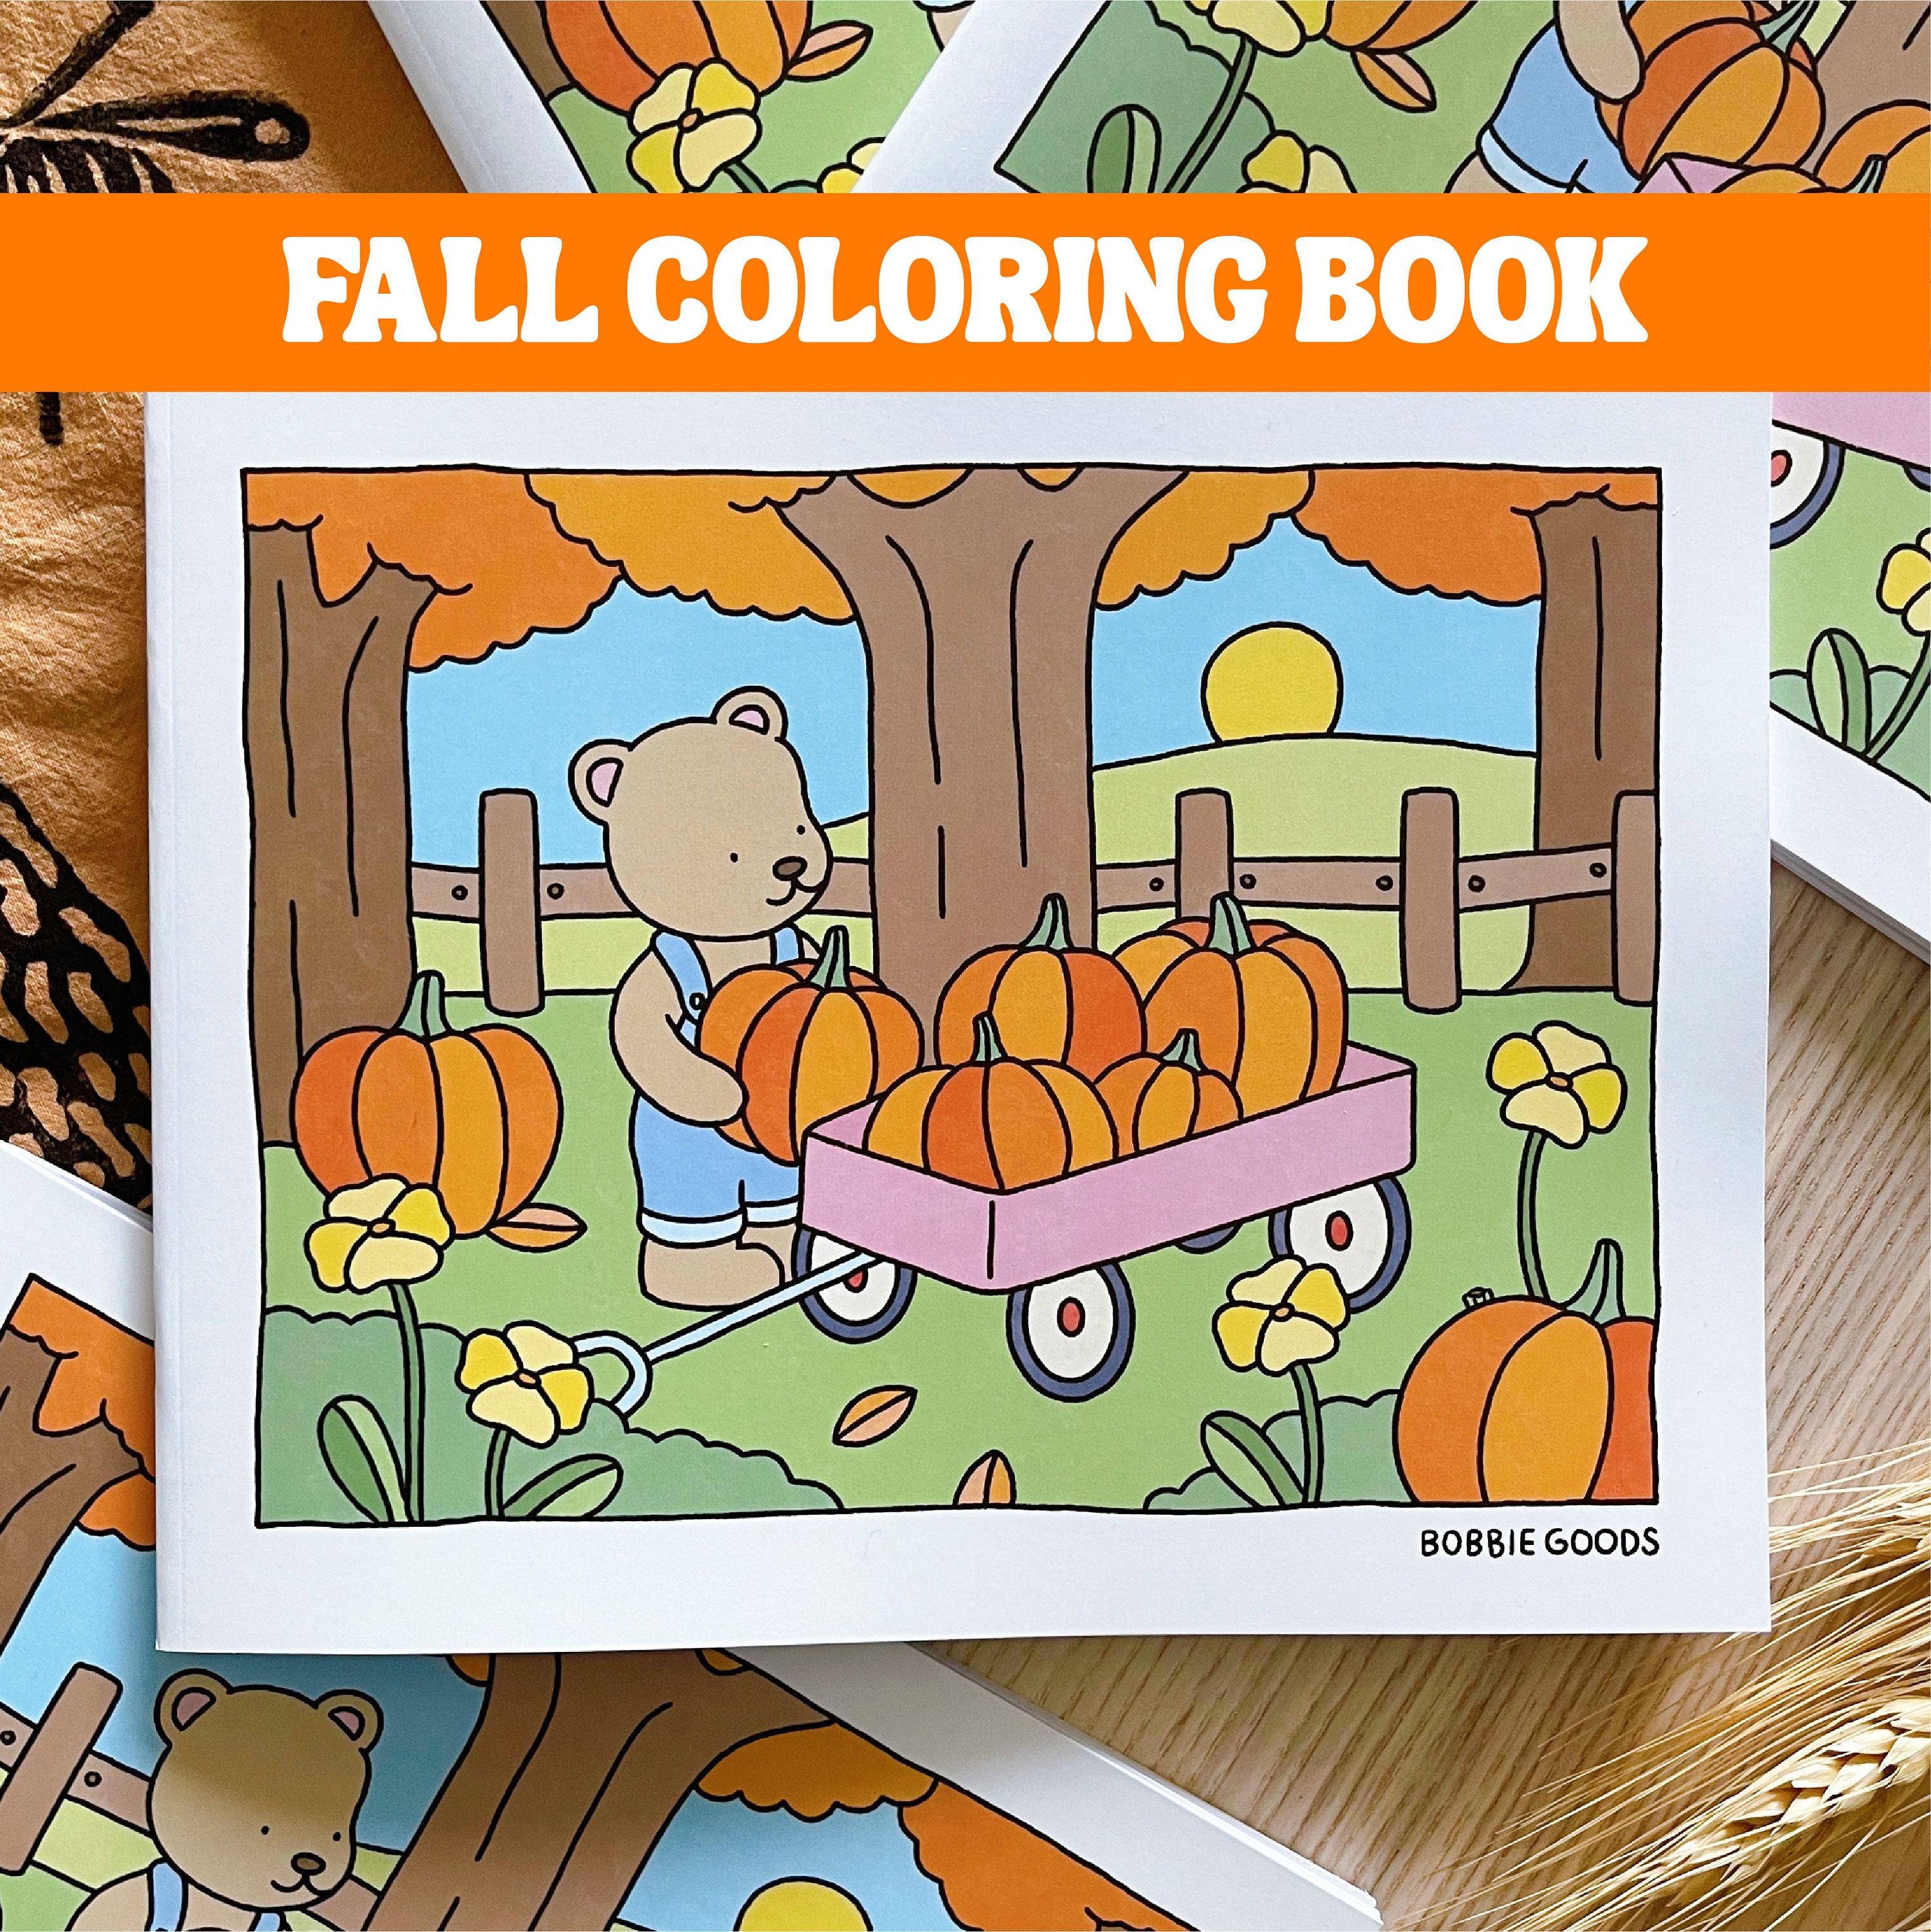 Fall coloring book by bobbie goods